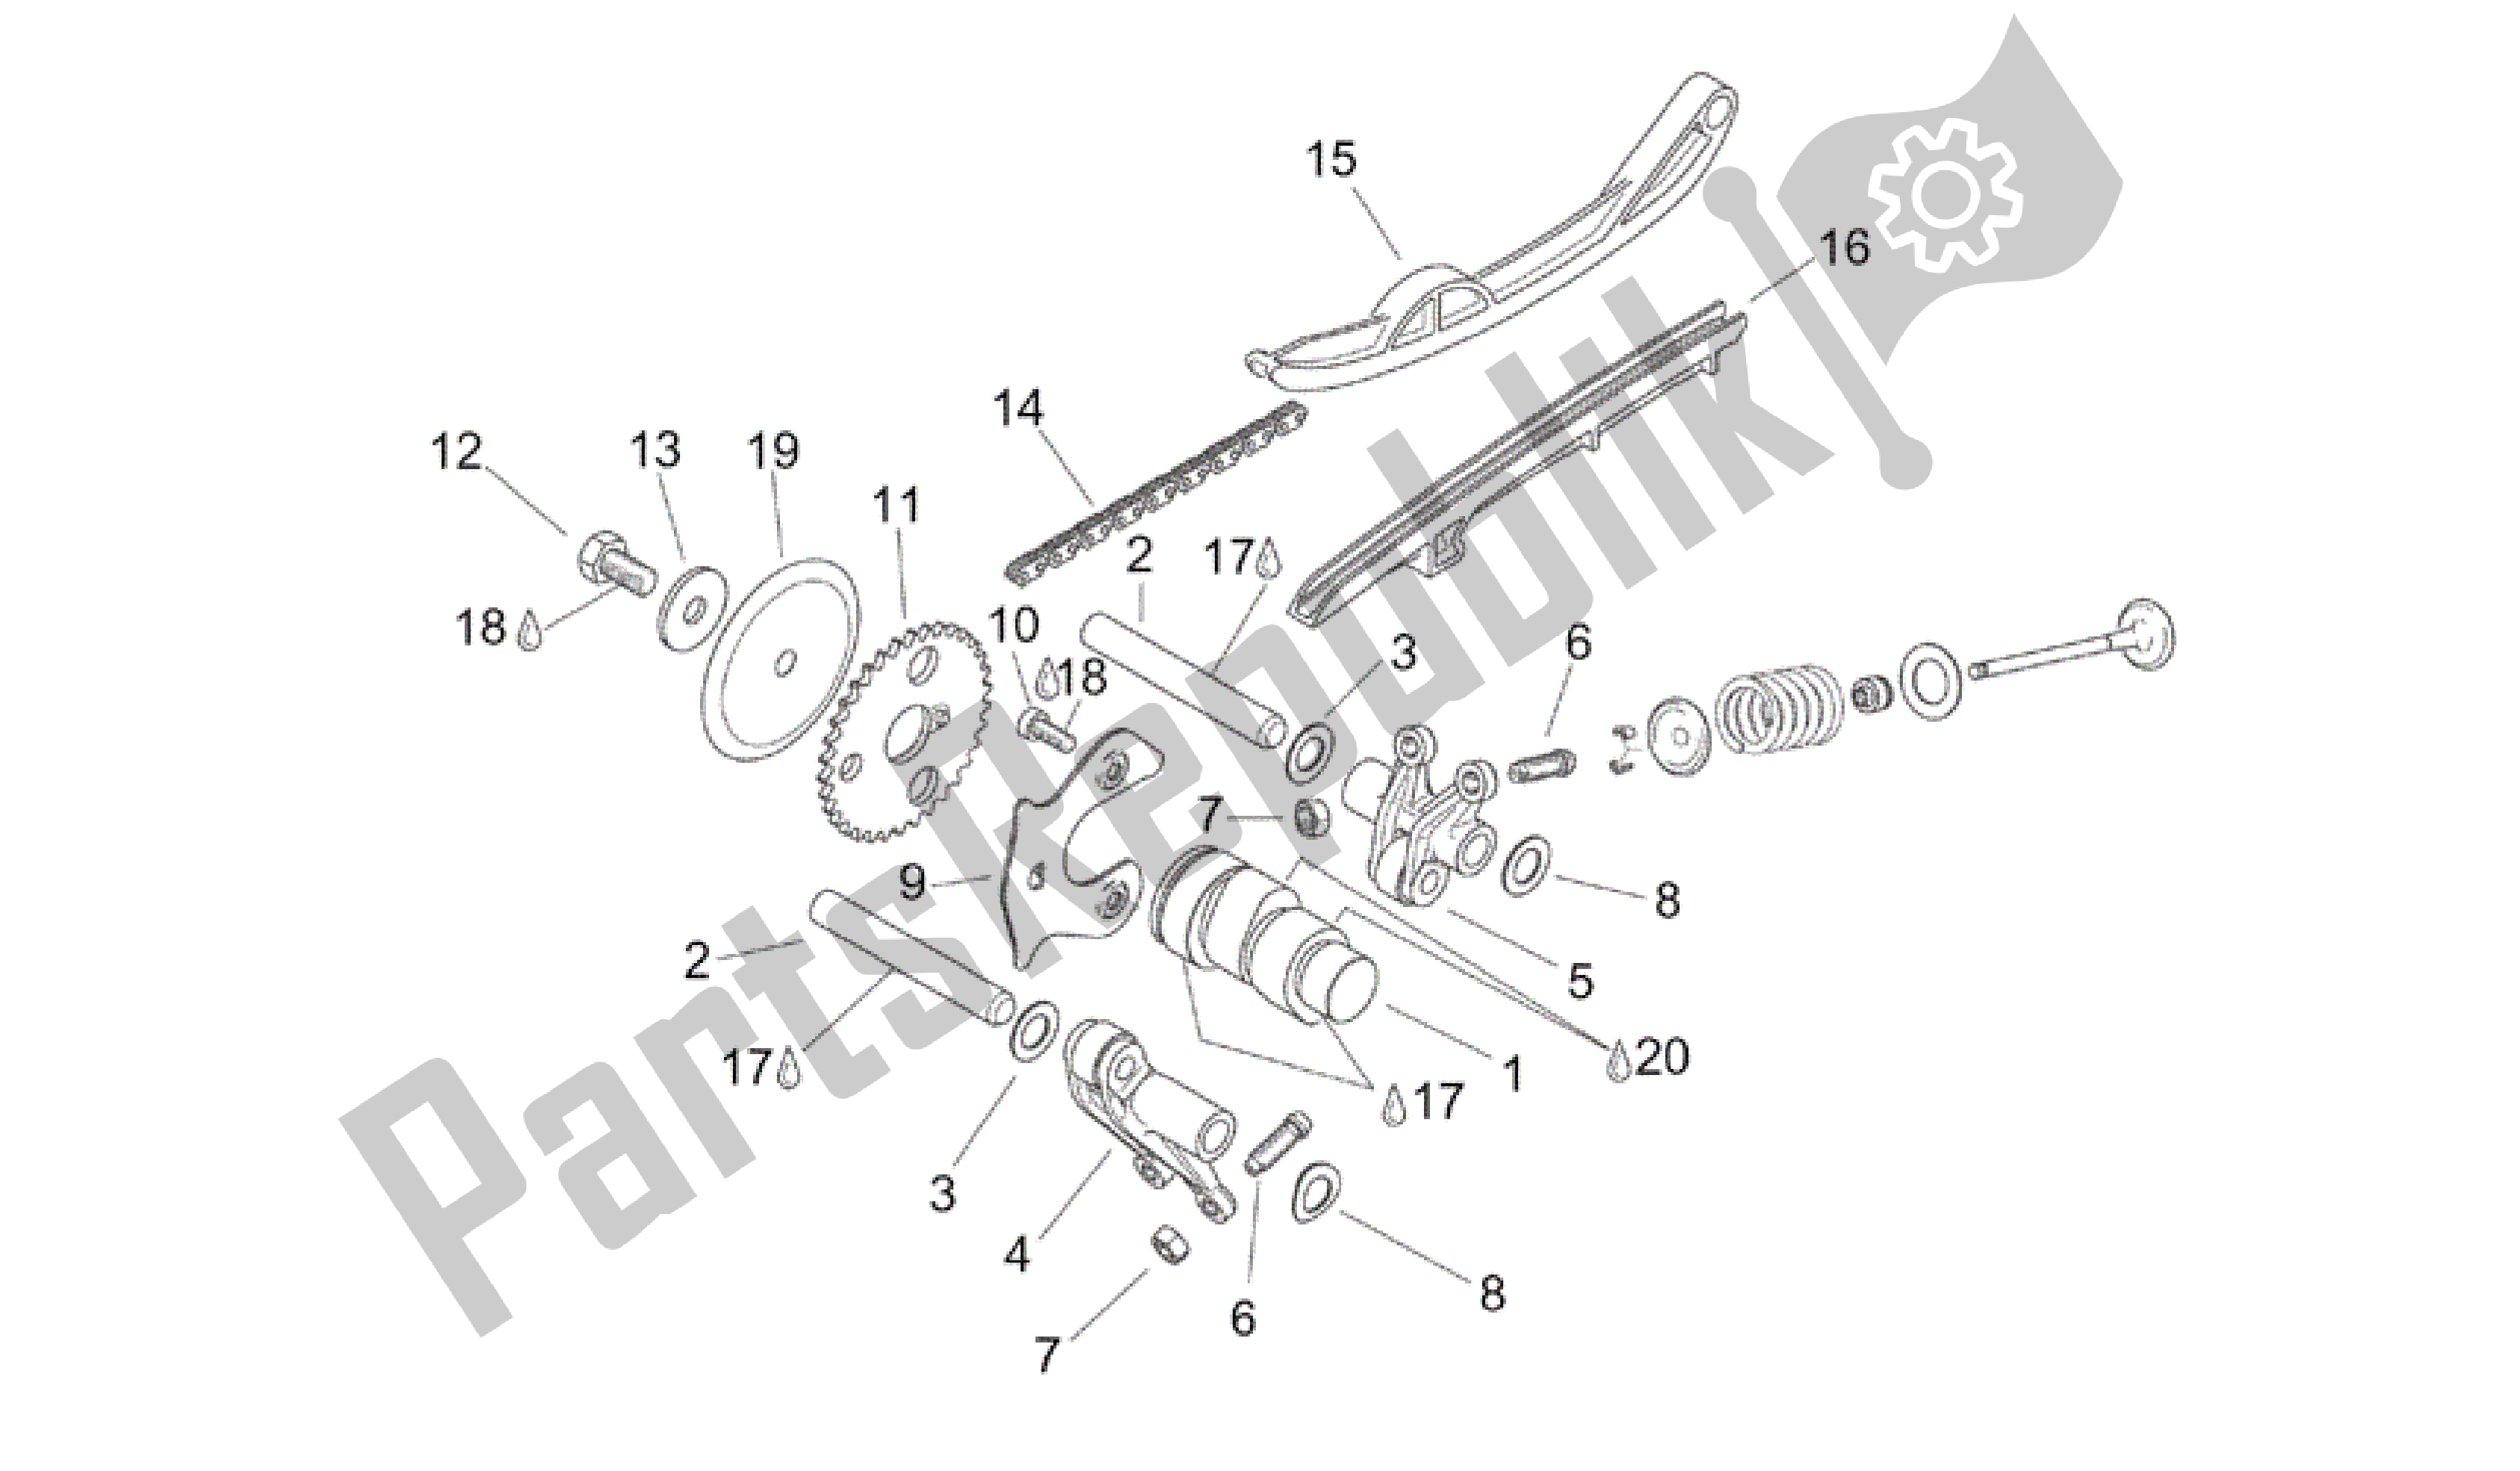 All parts for the Valve Control of the Aprilia Scarabeo 125 1999 - 2004